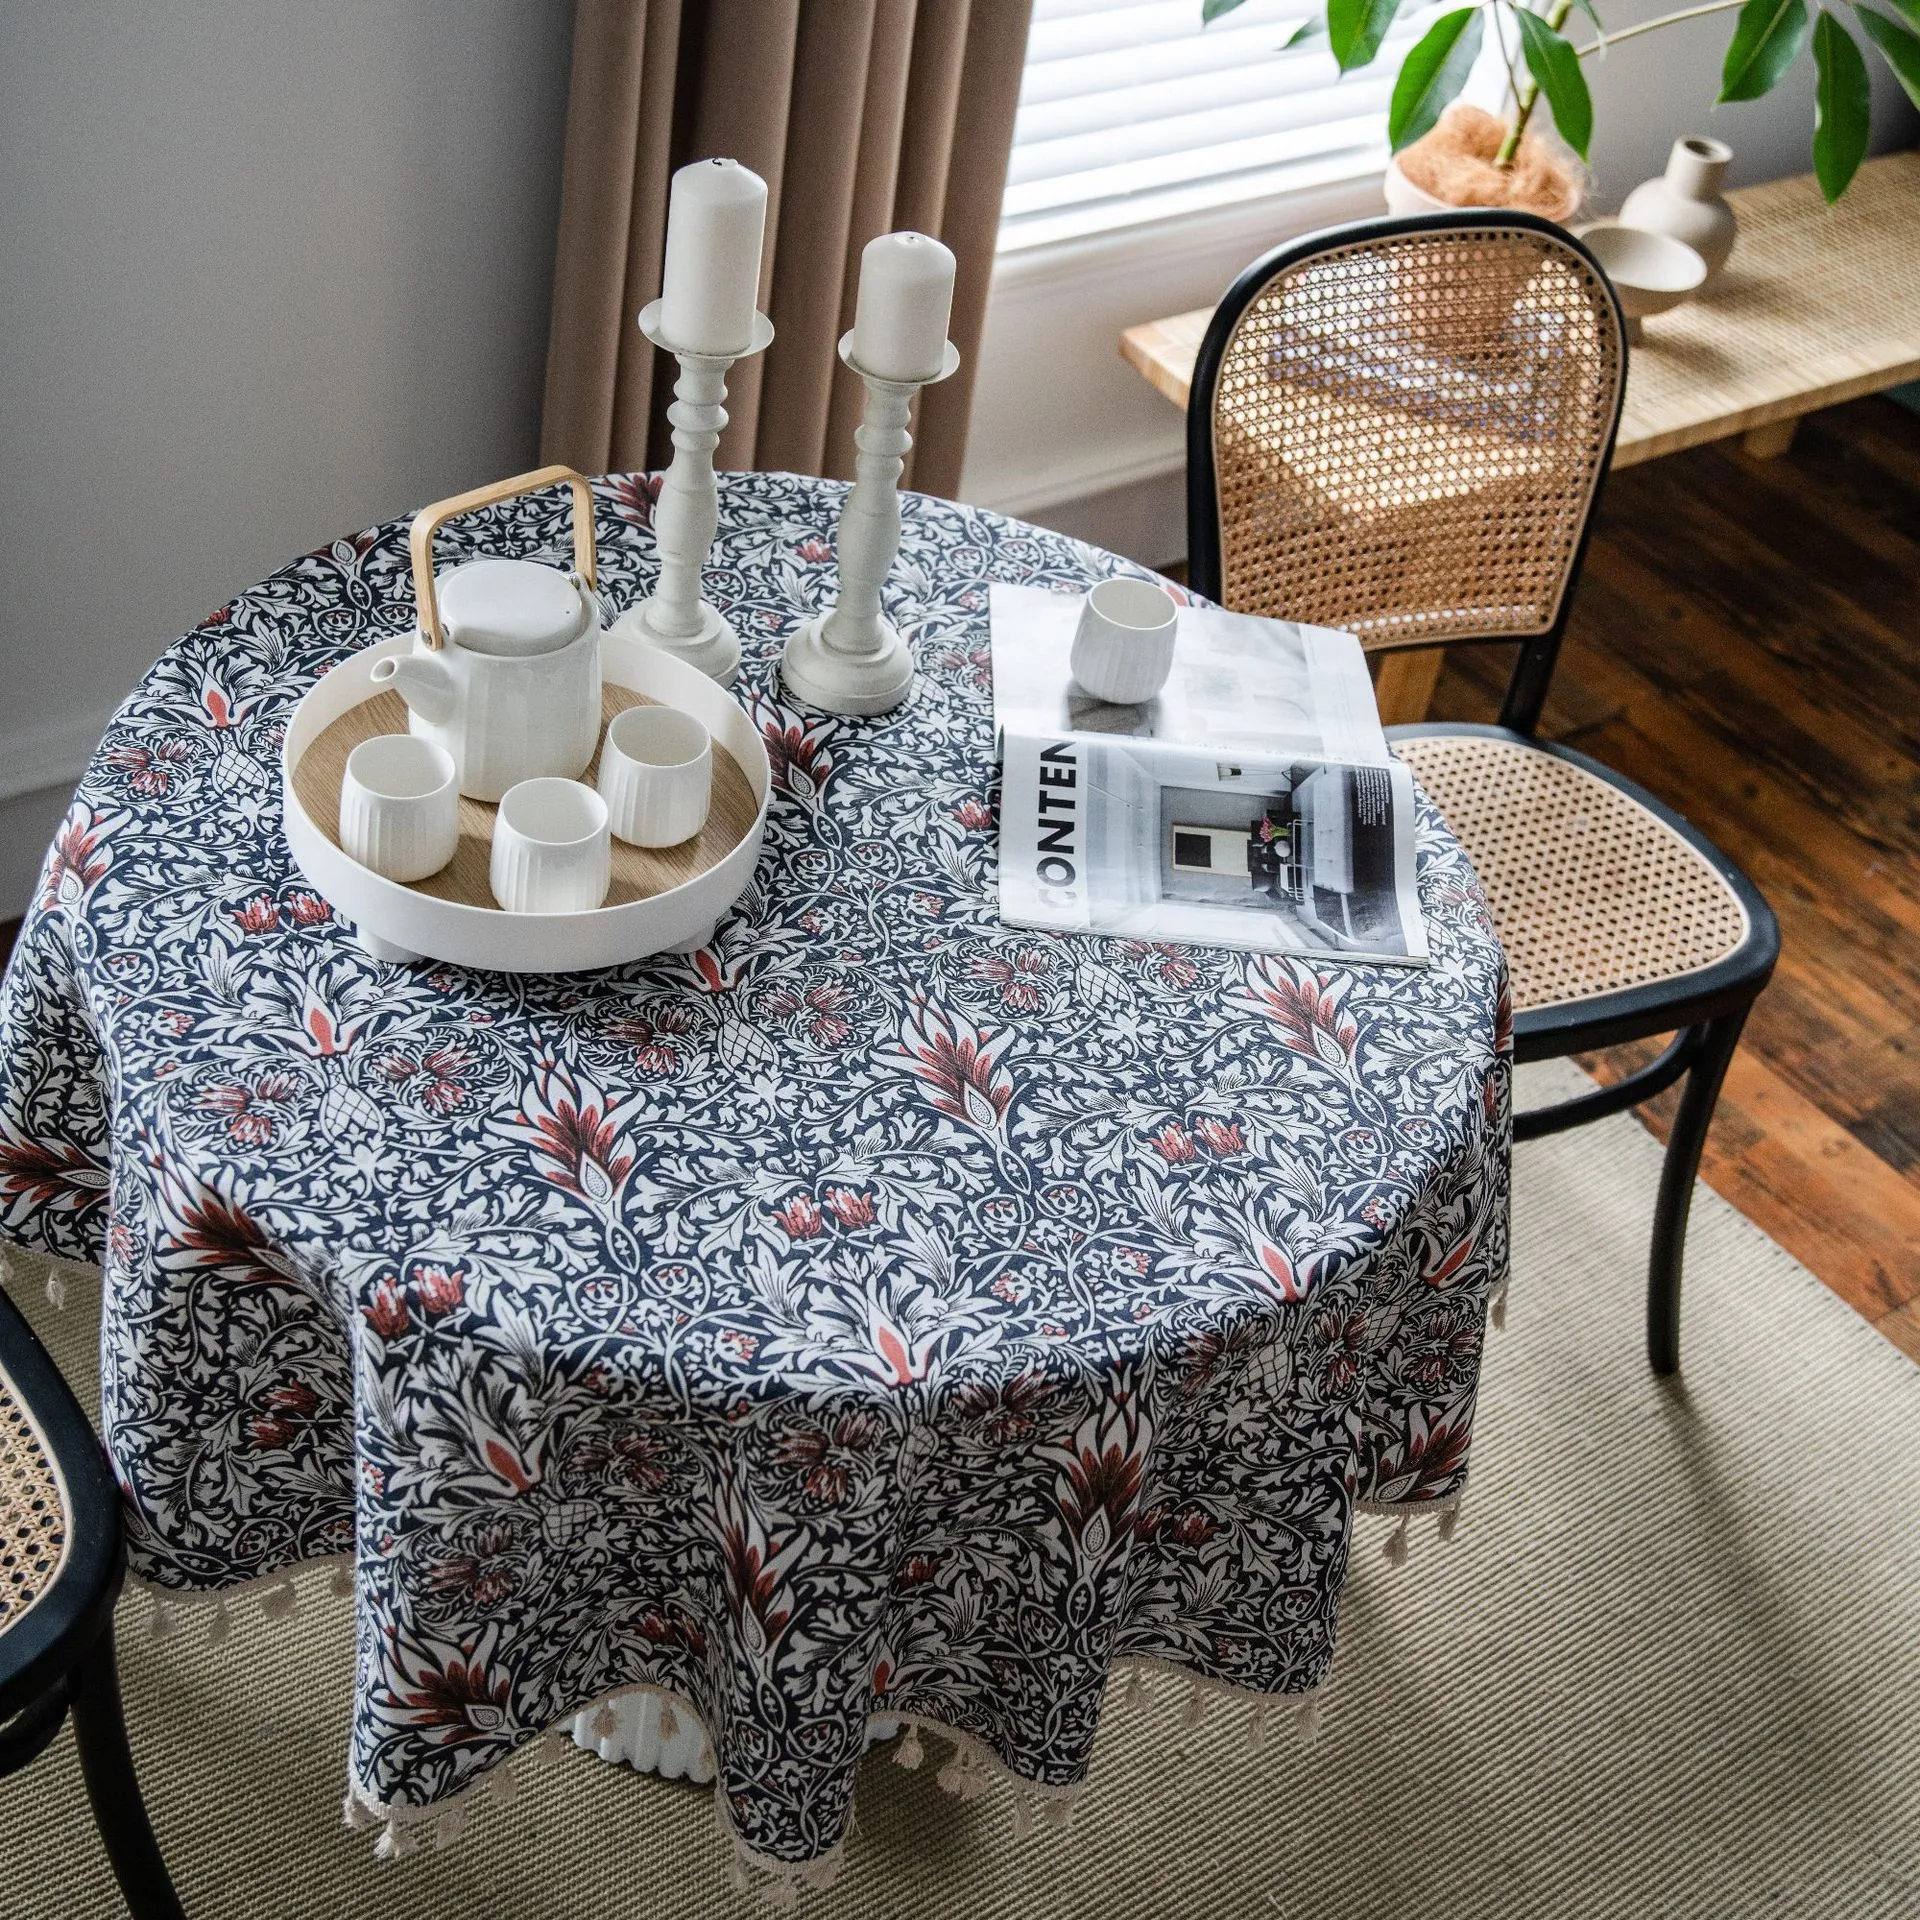 

Cotton Hemp Round Tablecloth Waterproof and Oilproof Tablecloth Home Coffee Table Desk Cover Birthday Party Table Decoration